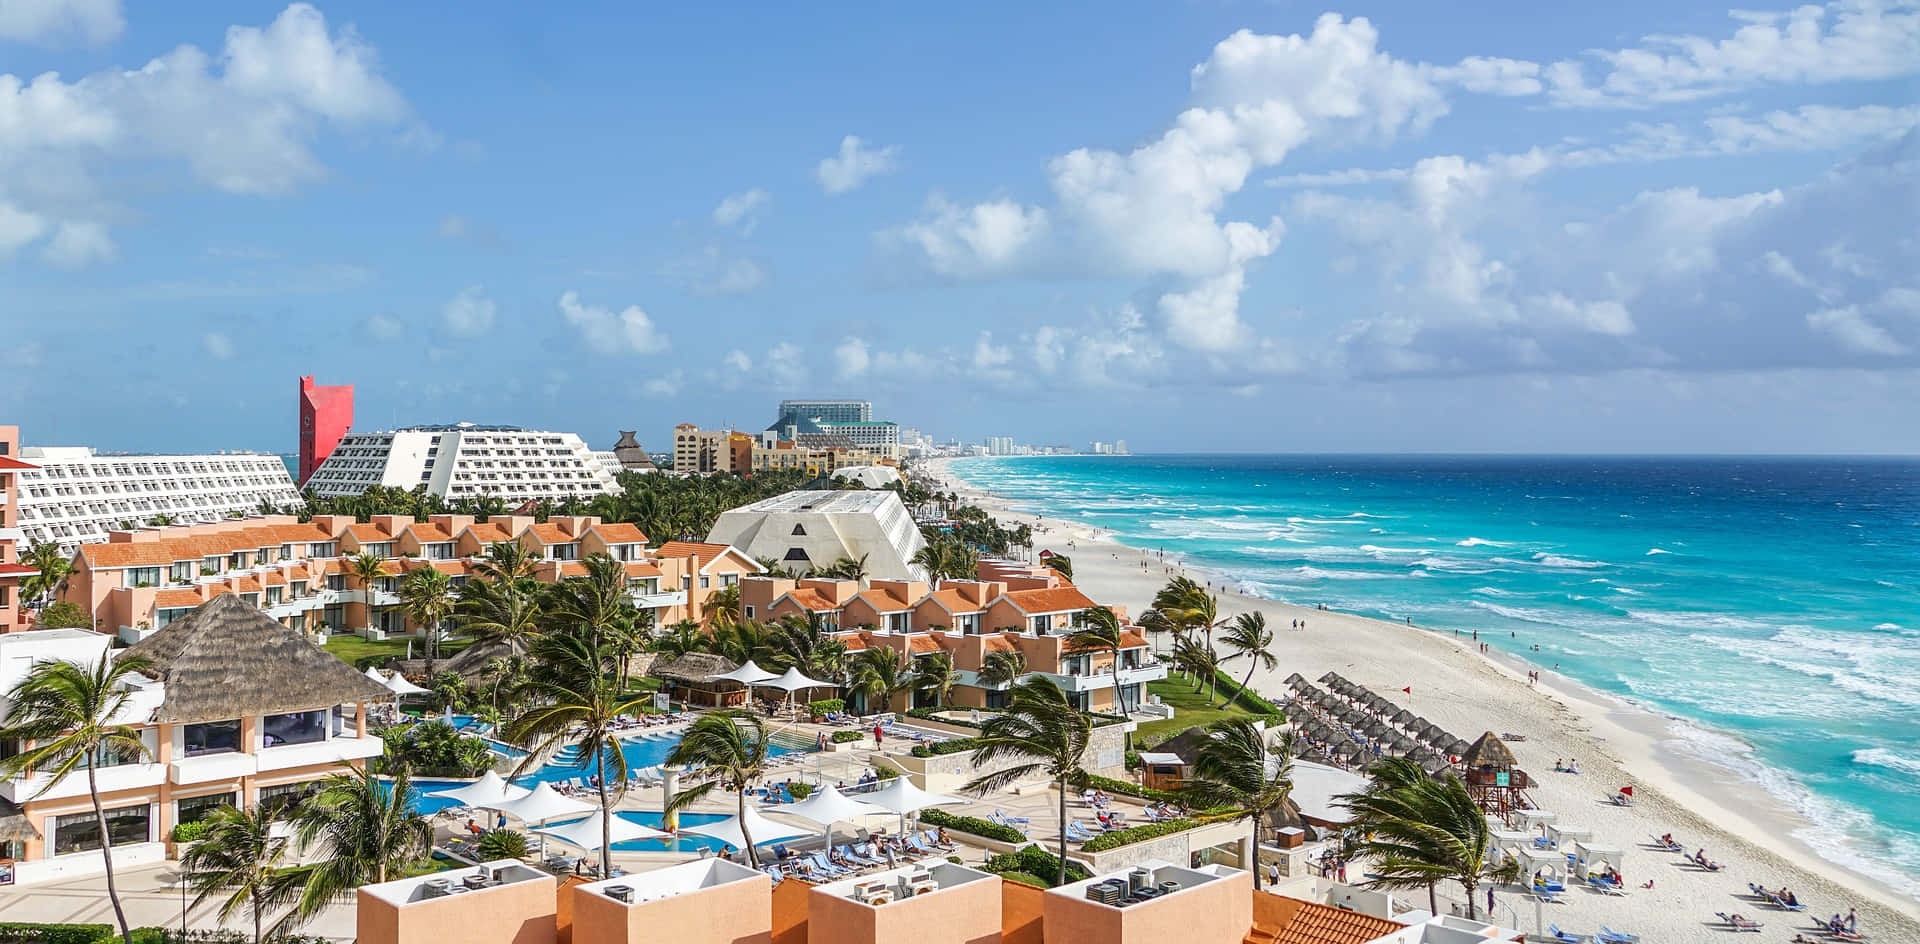 Enjoy a sun-drenched getaway in the Mexican Caribbean.